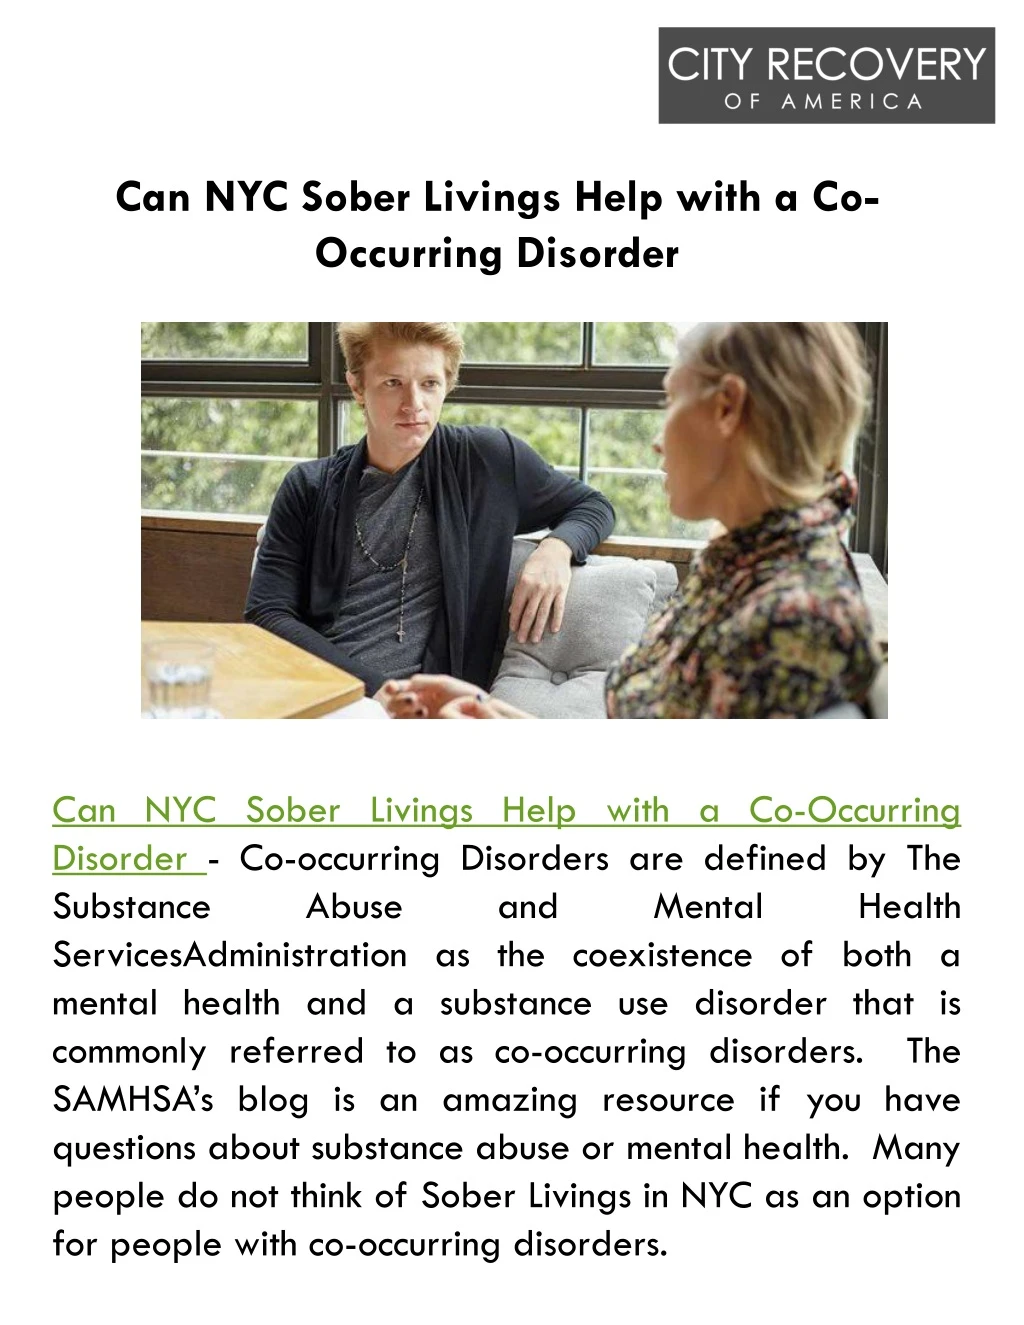 can nyc sober livings help with a co occurring